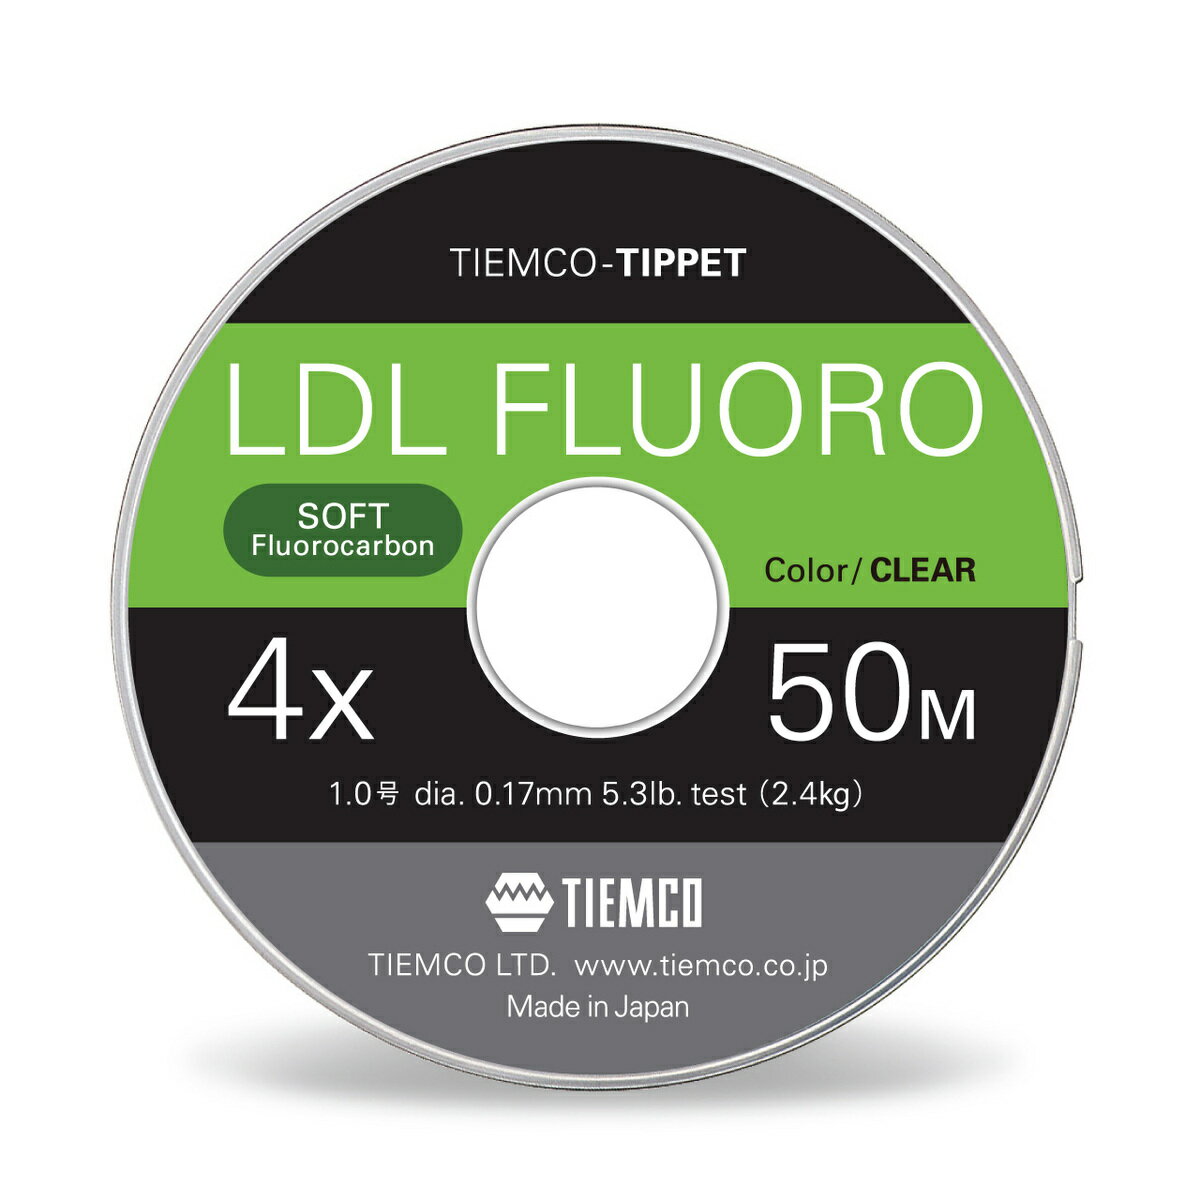 TIEMCO LDL フロロティペット LDL Fluorocarbon Tippet Material 1